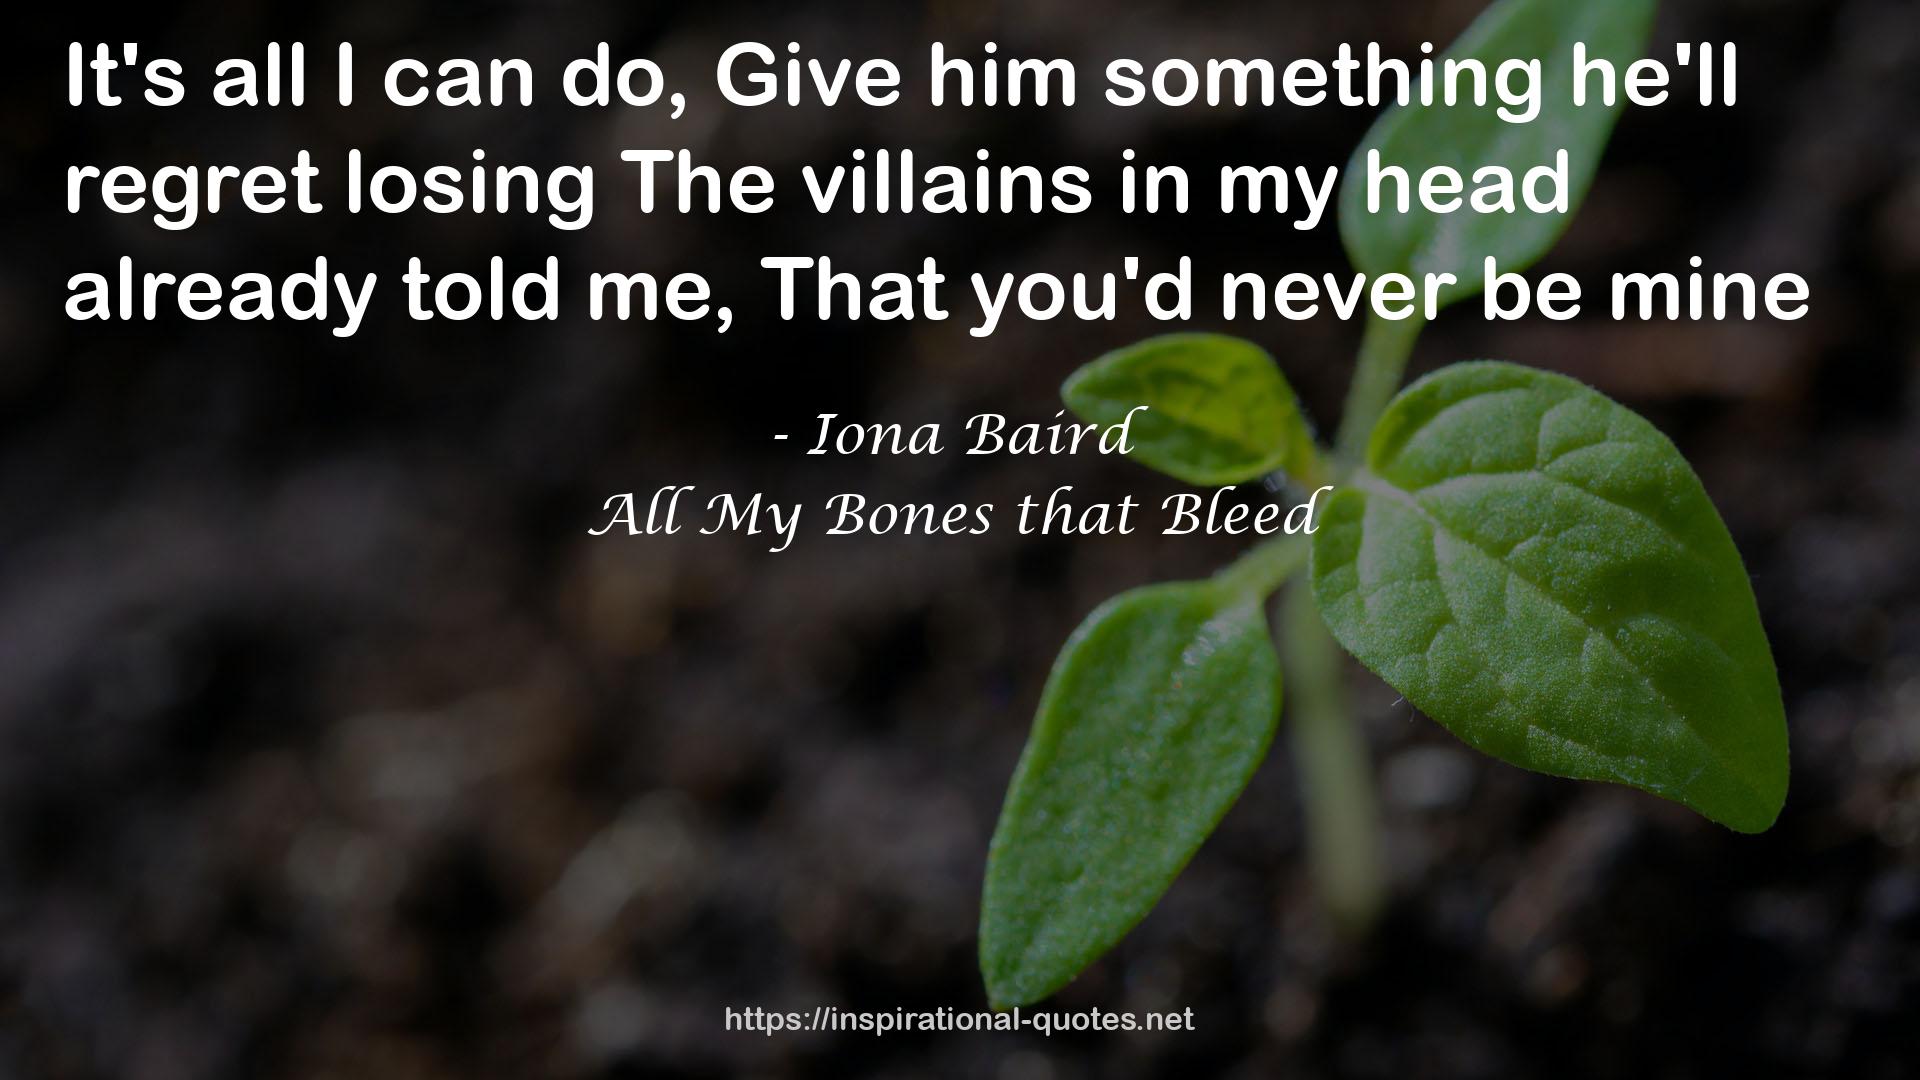 All My Bones that Bleed QUOTES